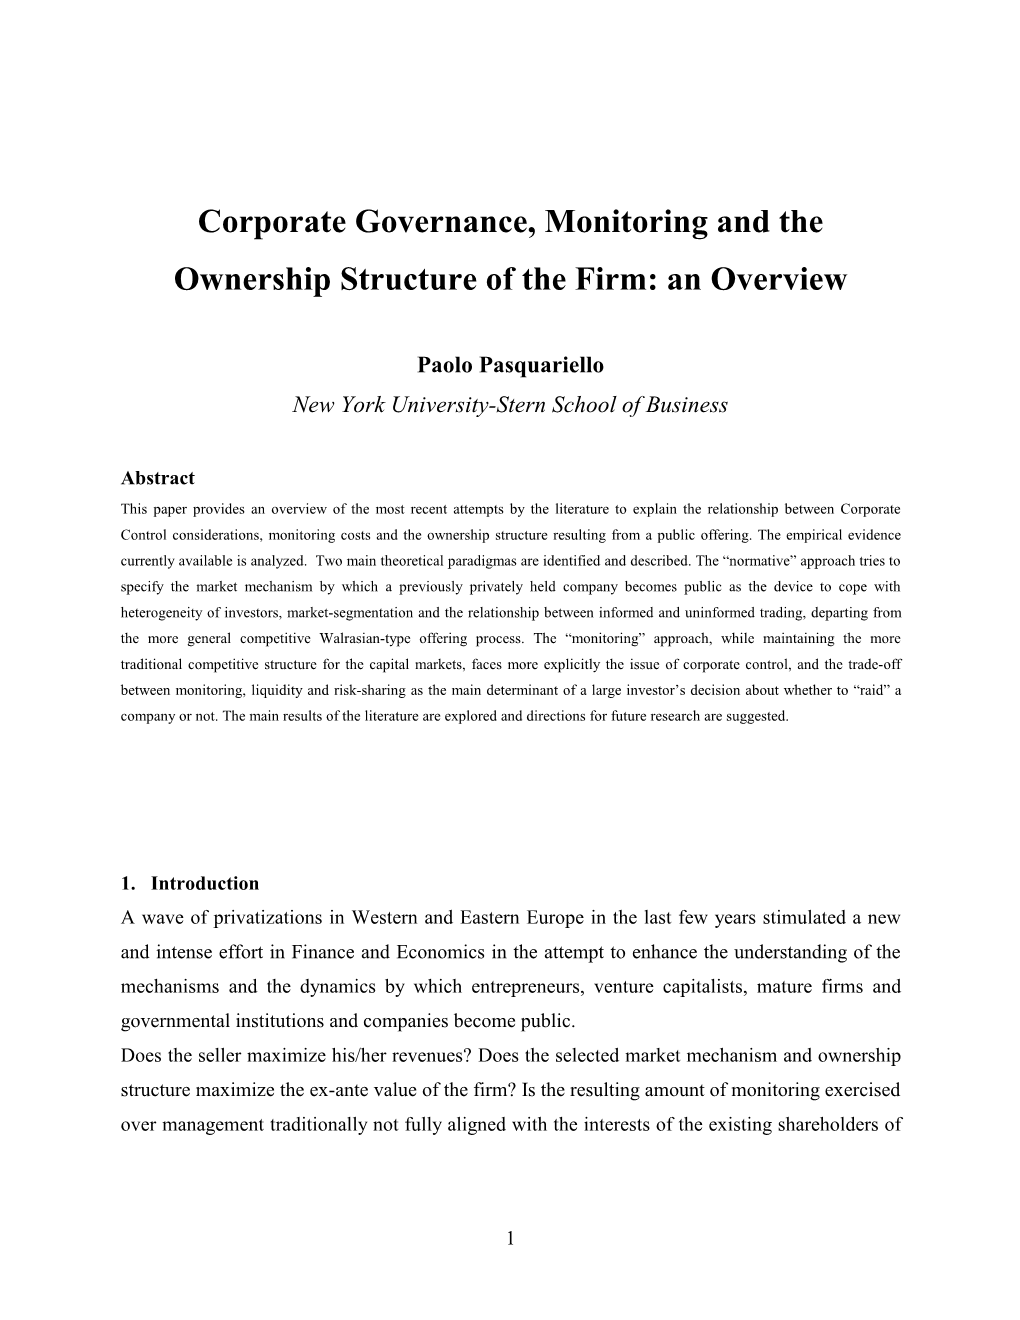 Corporate Governance, Monitoring and the Ownership Structure of the Firm: an Overview